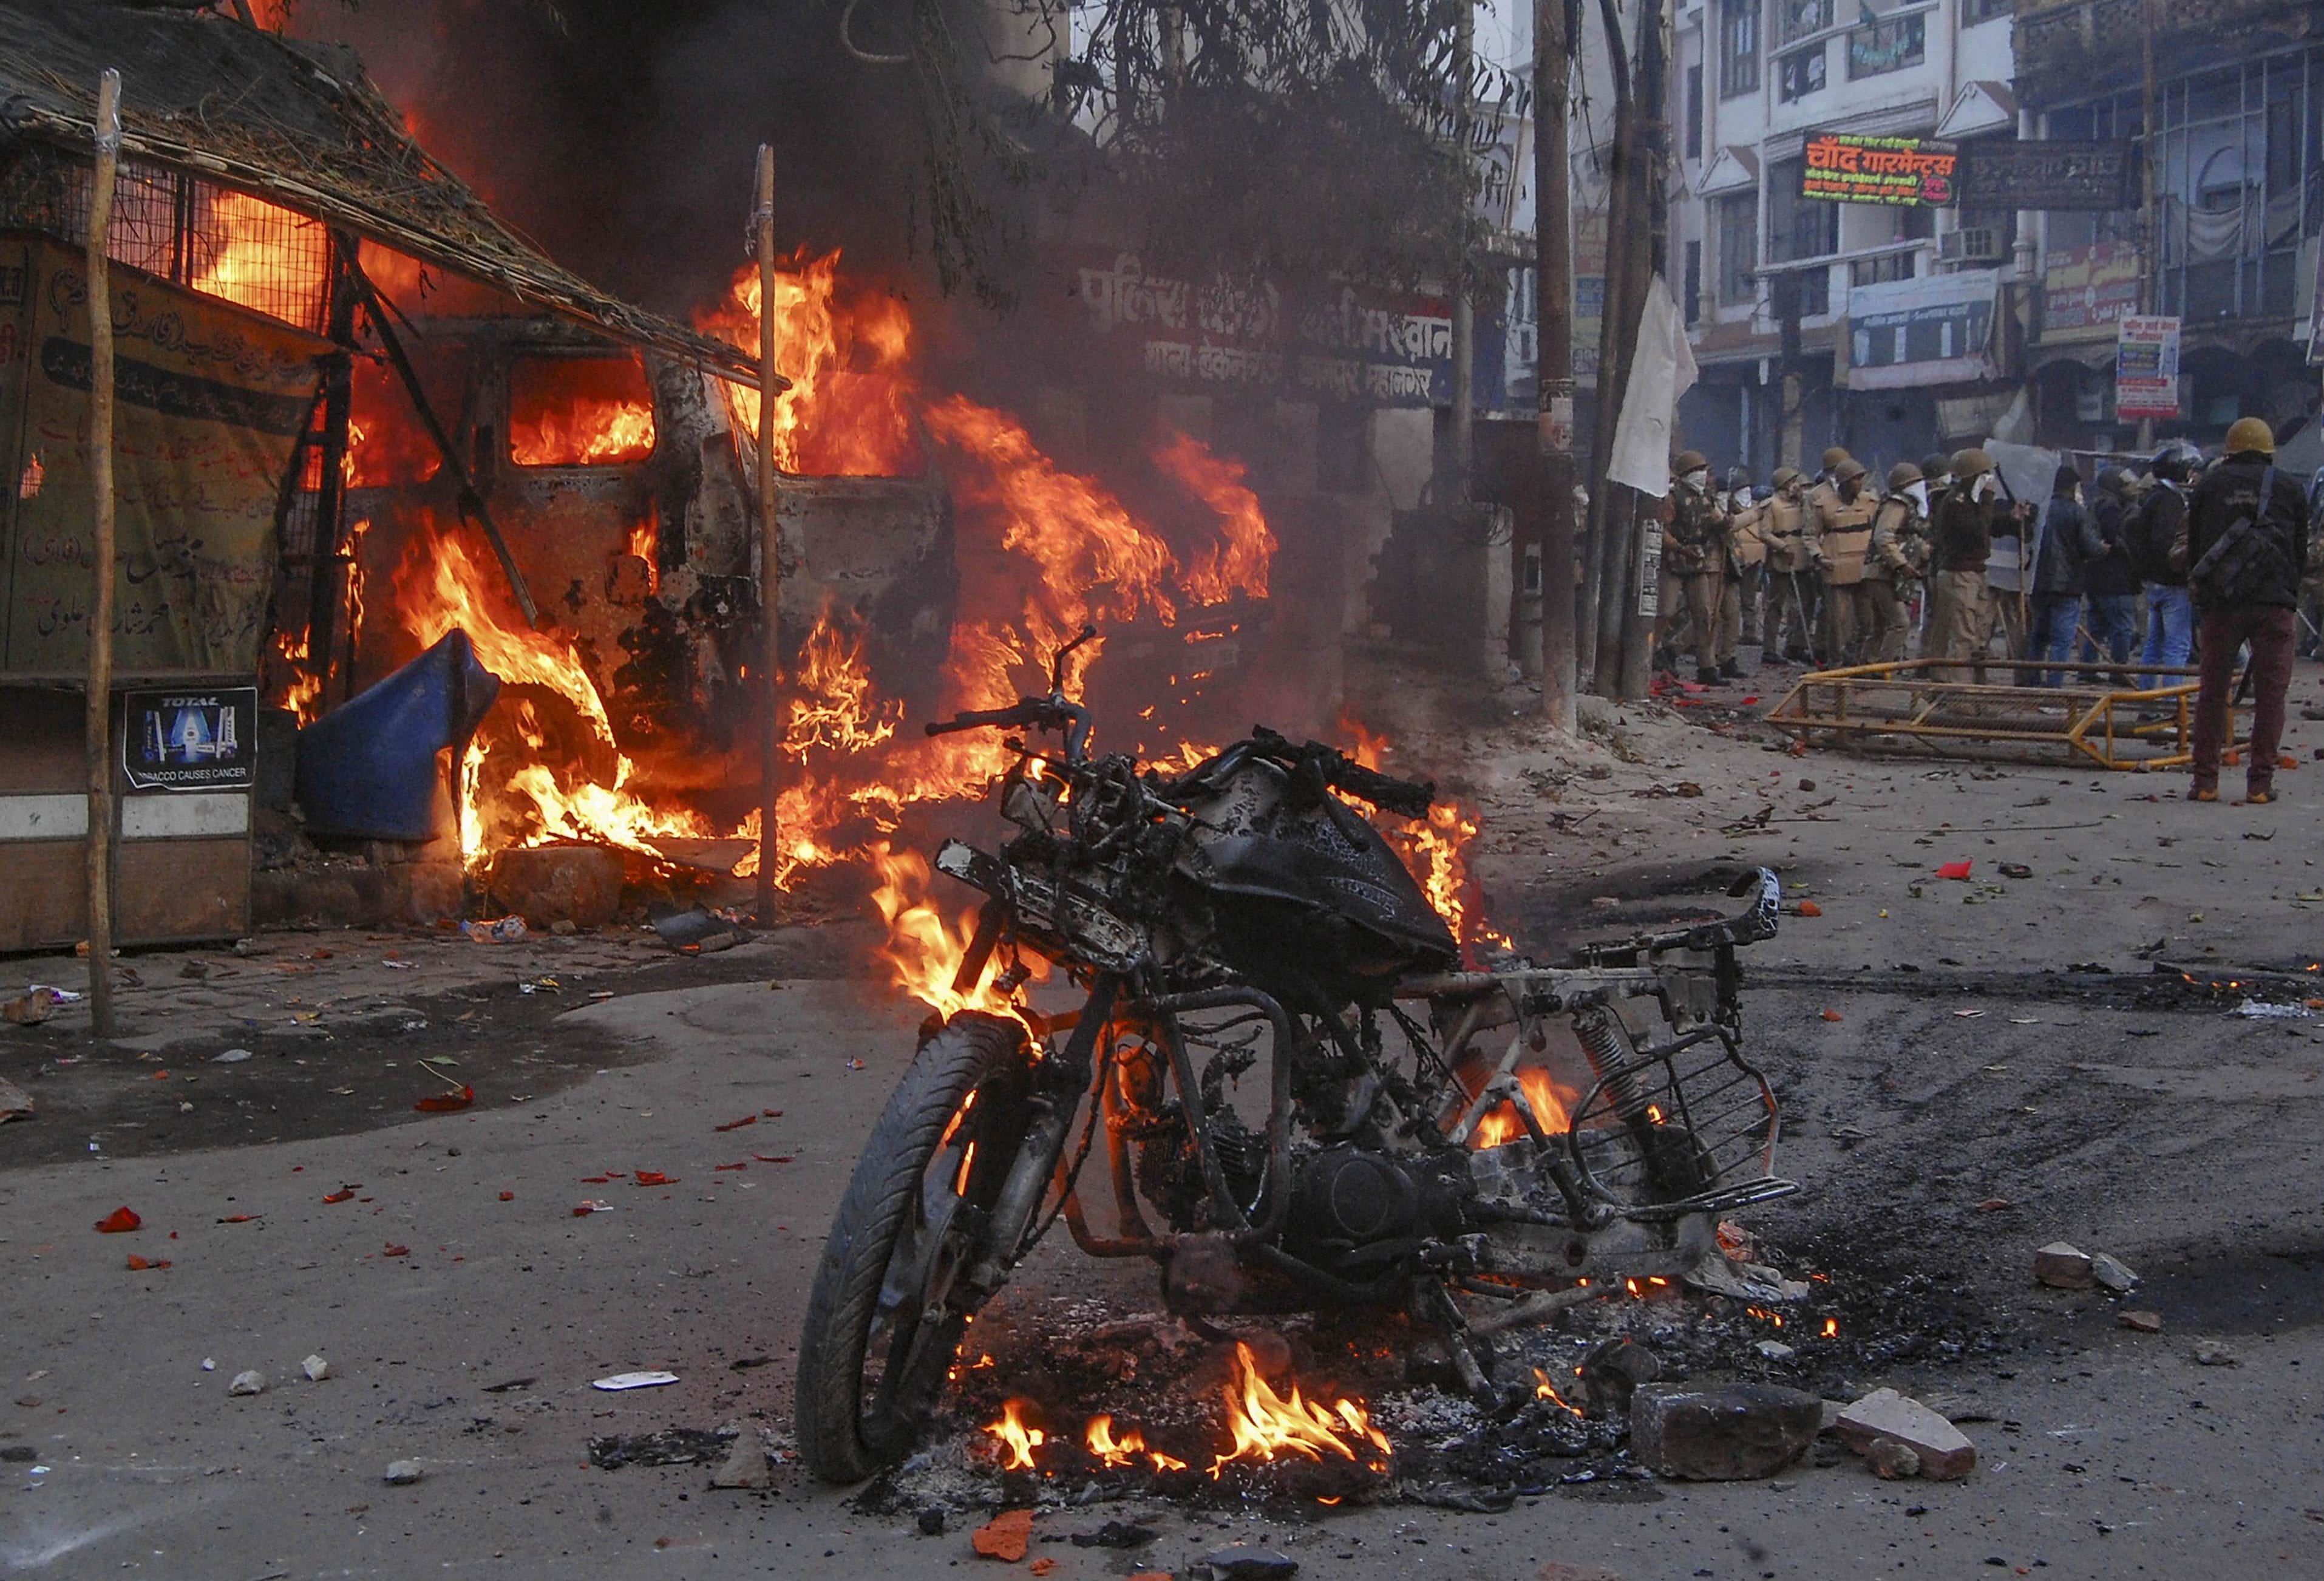 Fresh violence in Kanpur as UP remains volatile over CAA protests